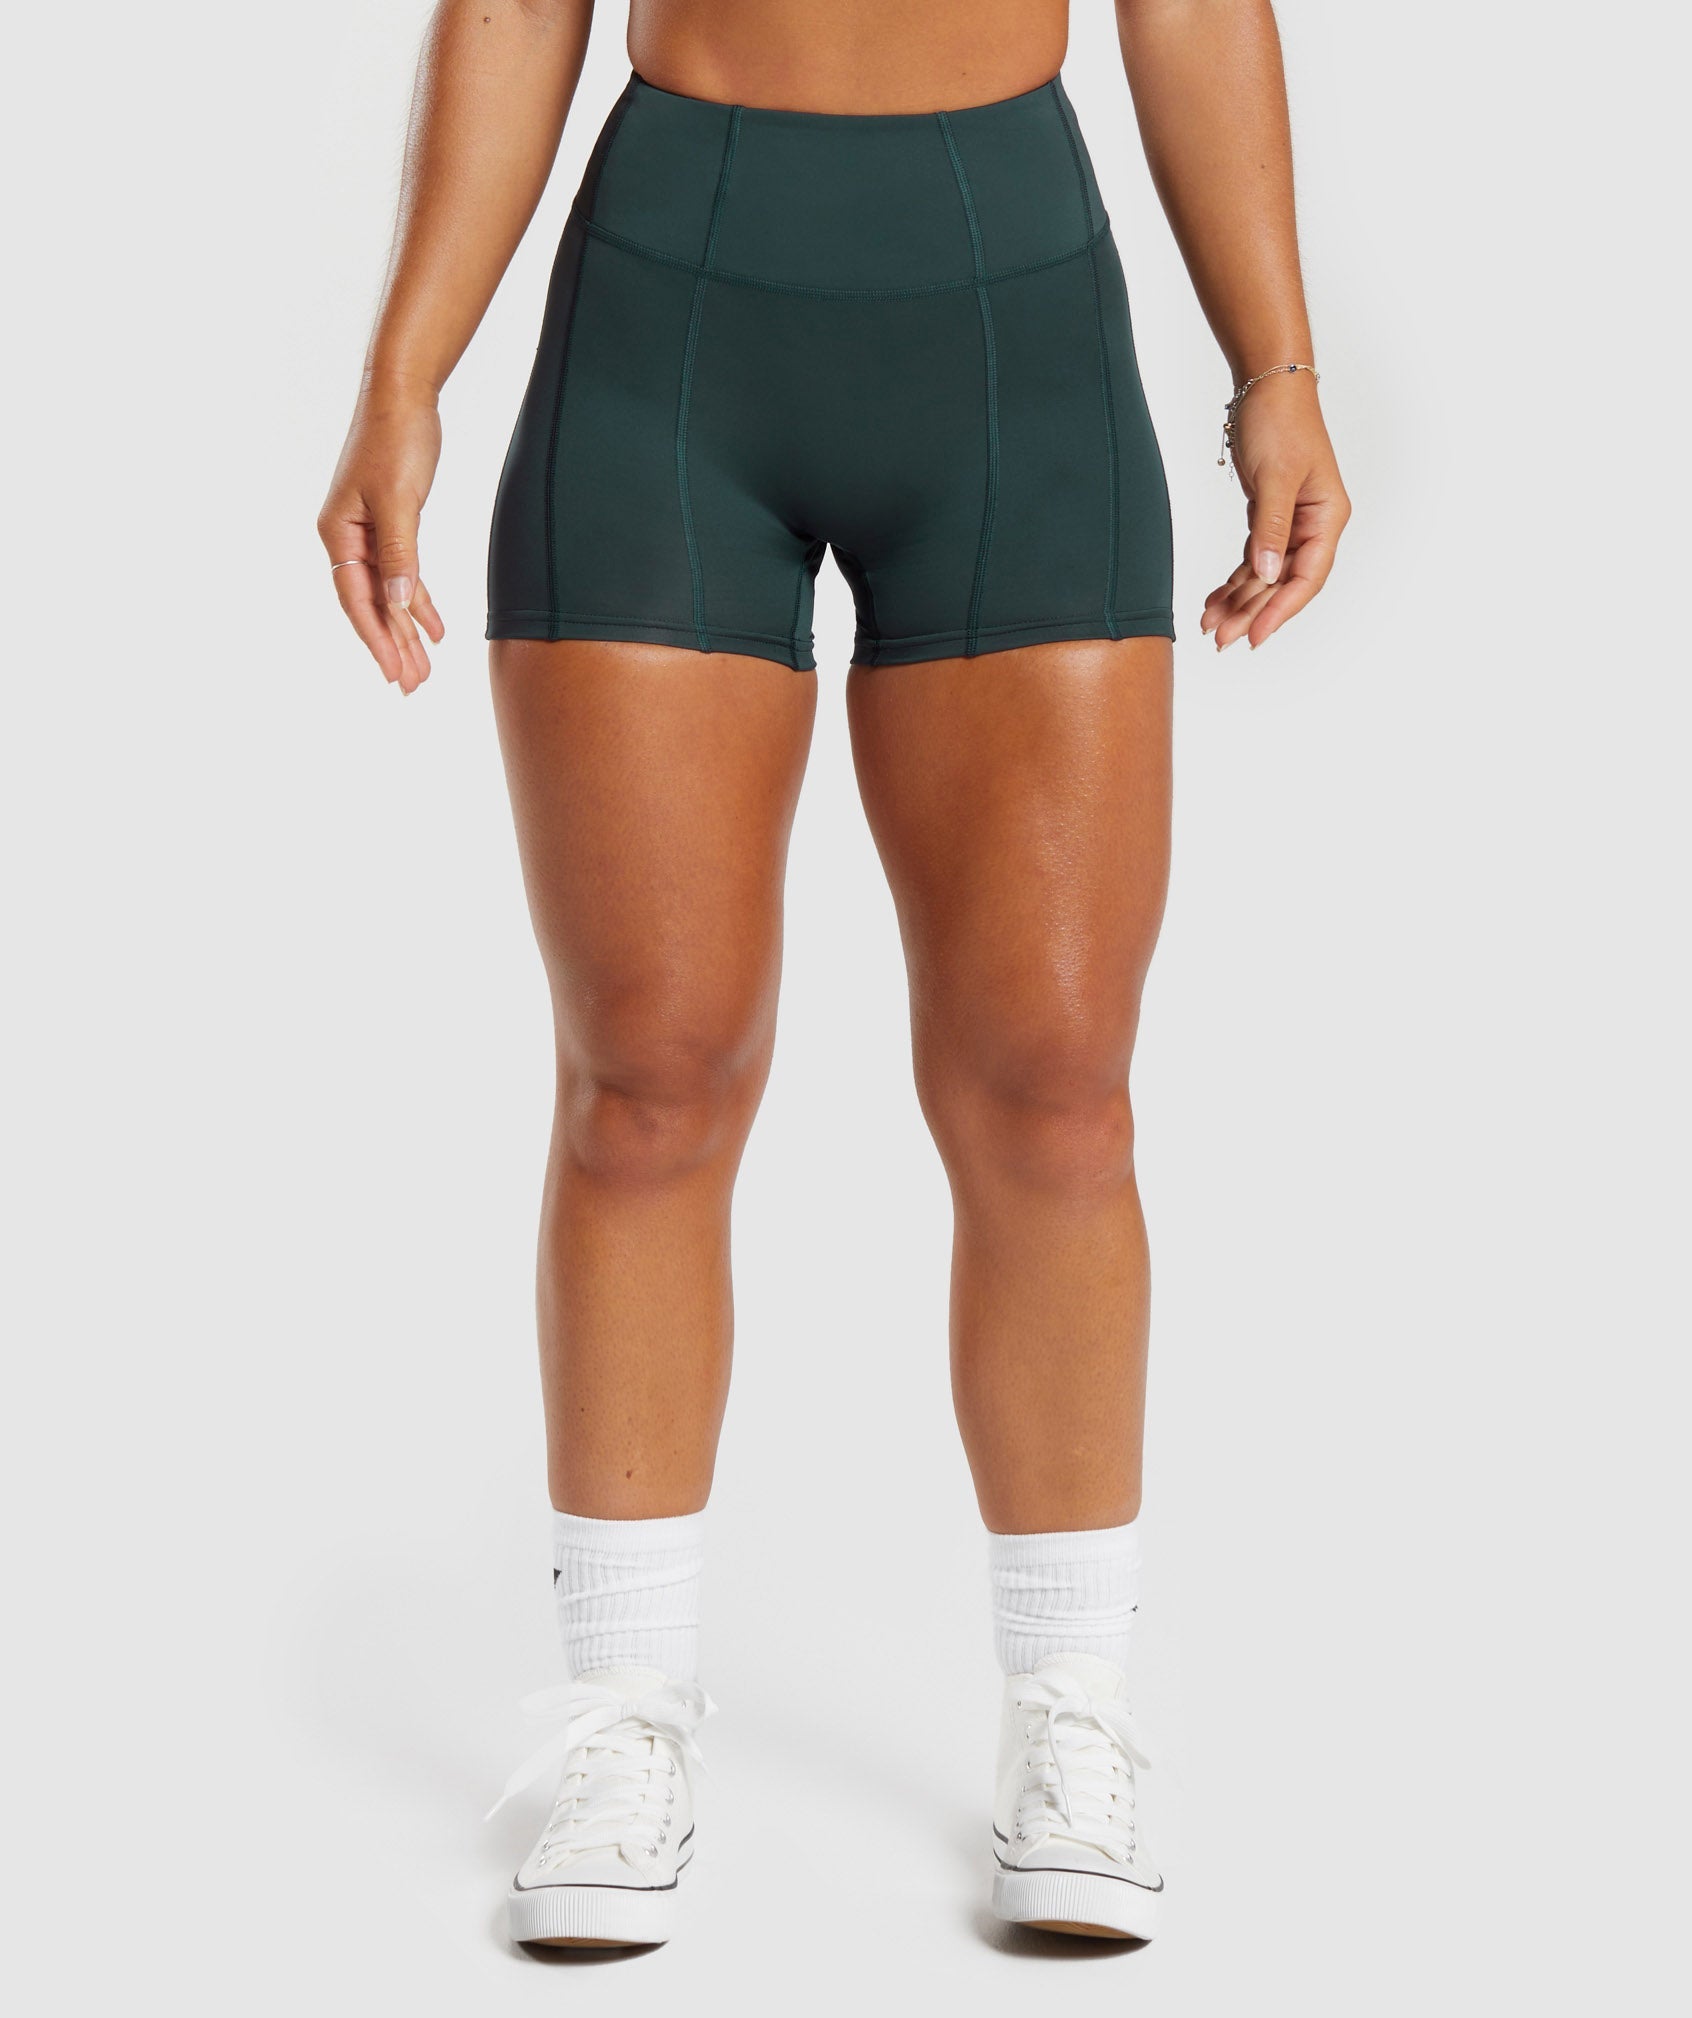 GS Power High Rise Shorts in Darkest Teal is out of stock